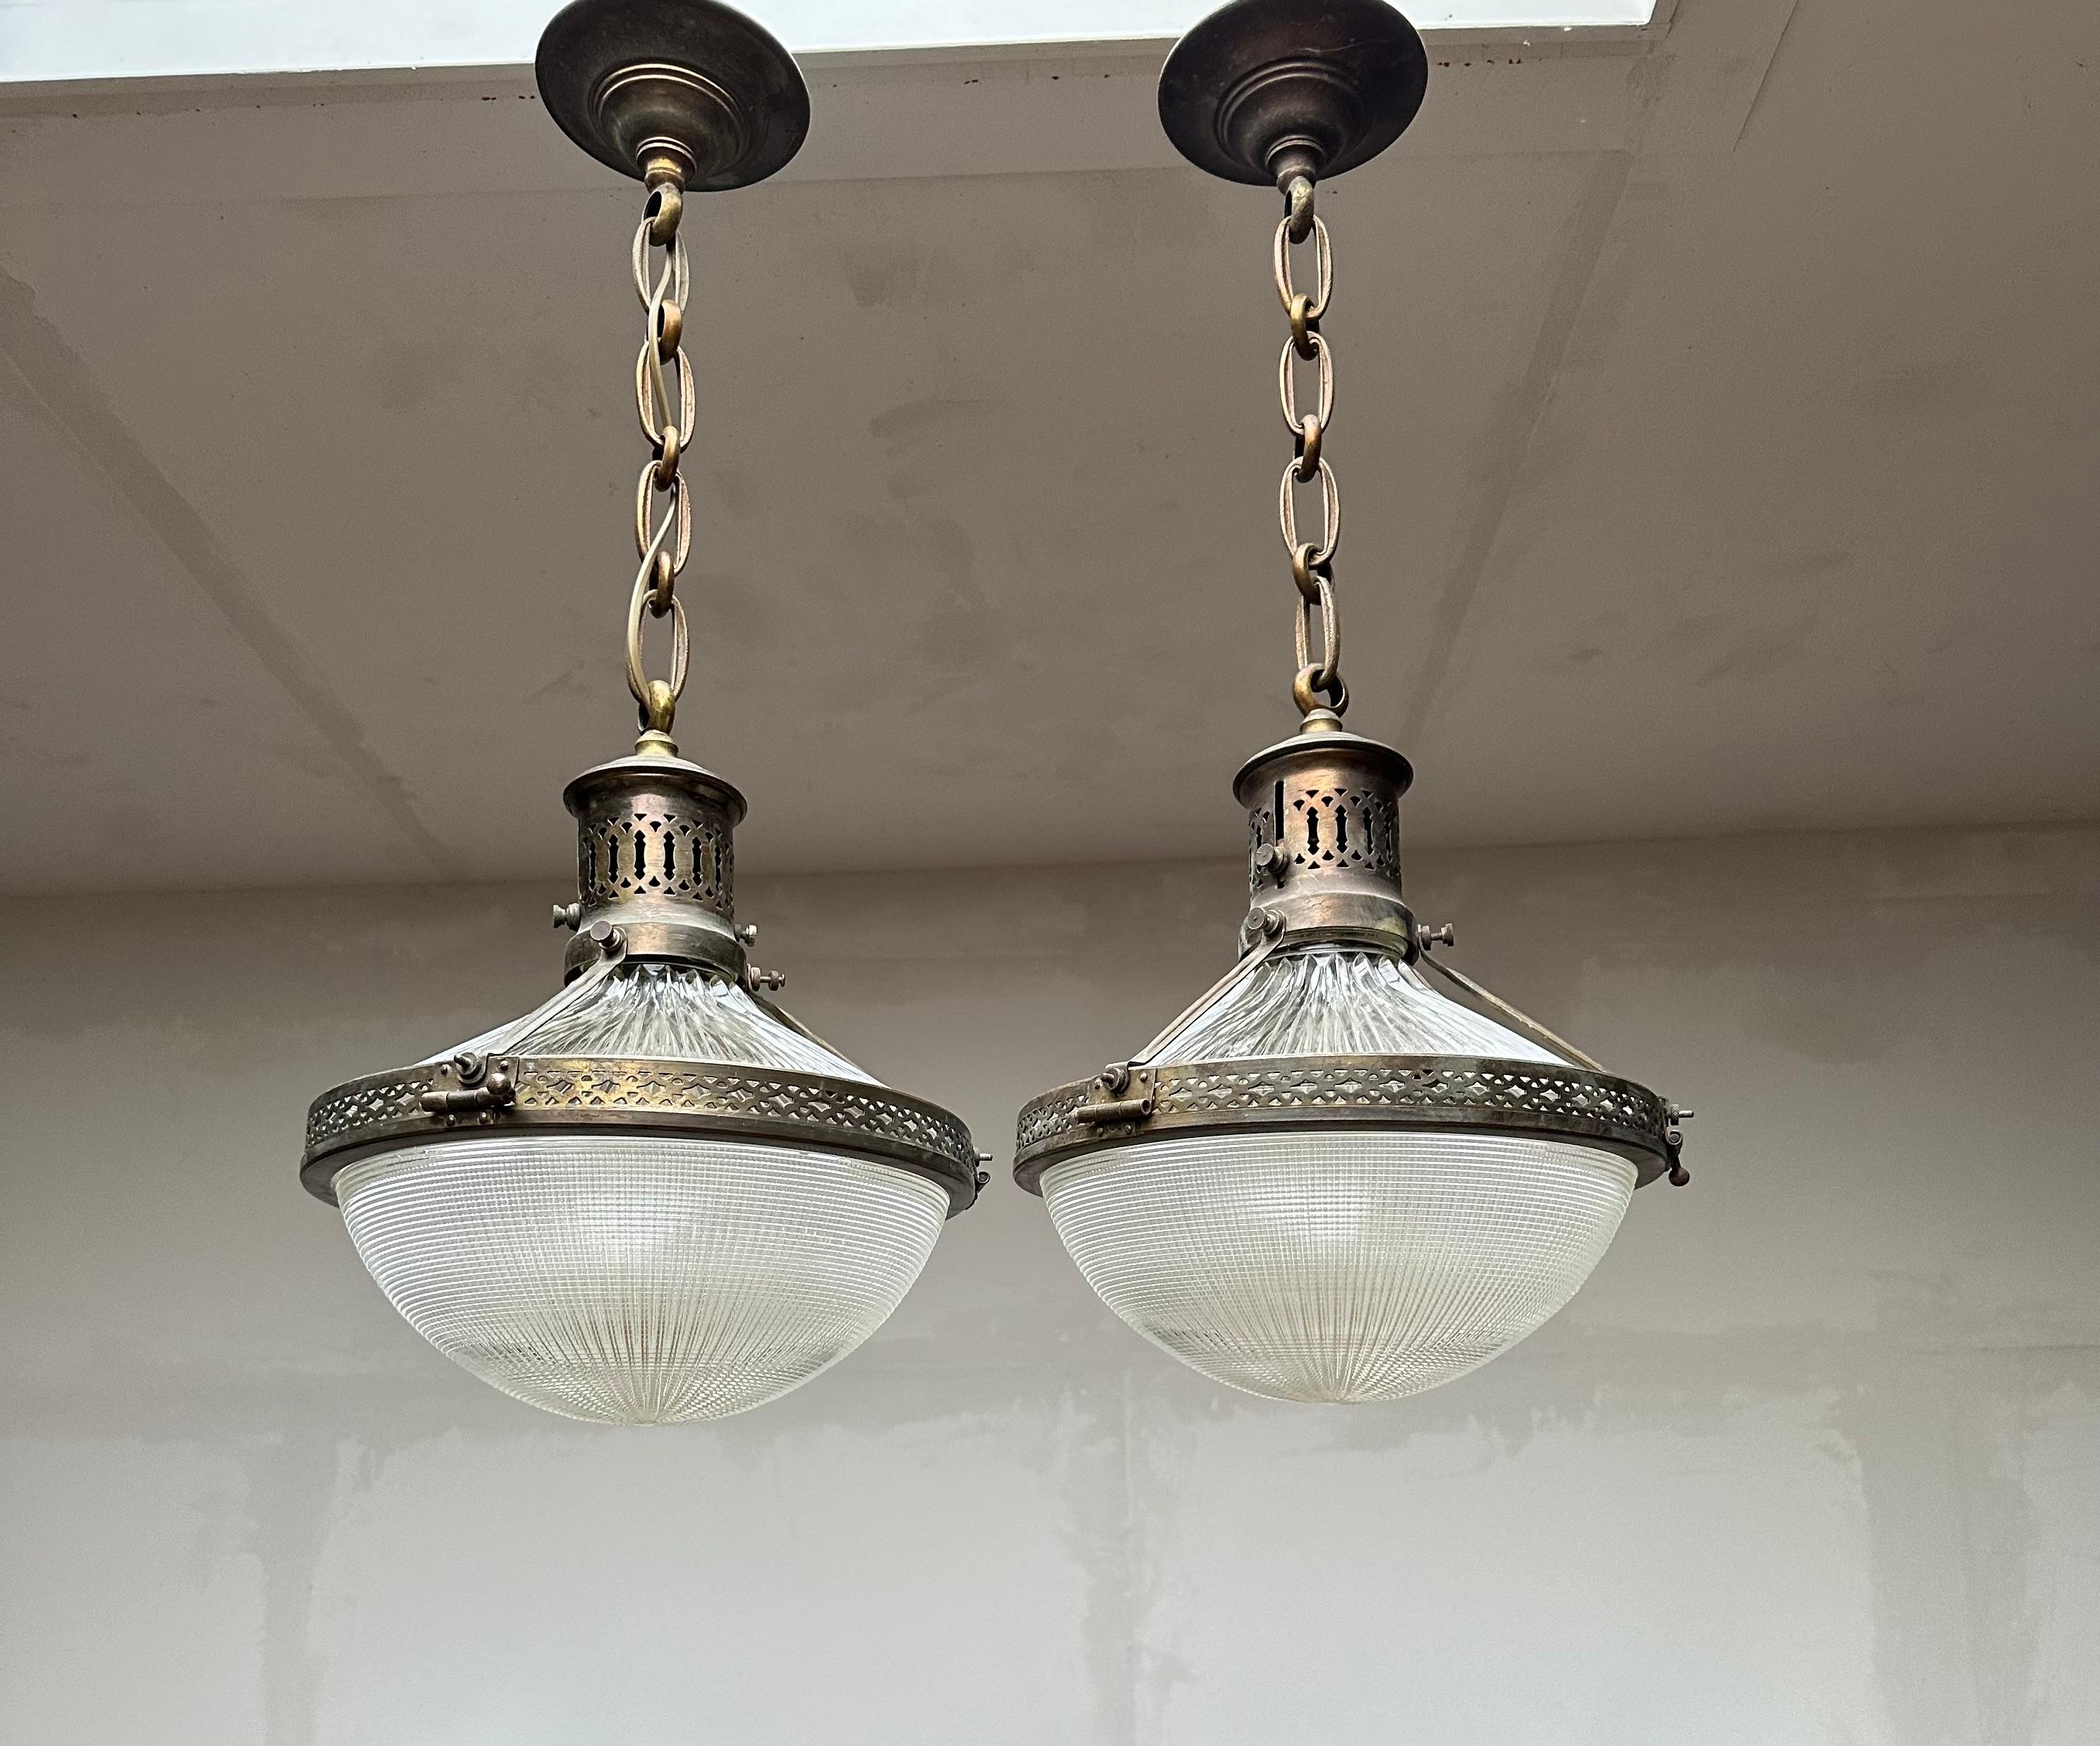 Top quality and condition, matching pair of Holophane light fixtures.

It does not matter whether you are decorating an Arts and Crafts, an Art Deco, a Mid-Century Modern or a more contemporary home or office, if you have the right space for them